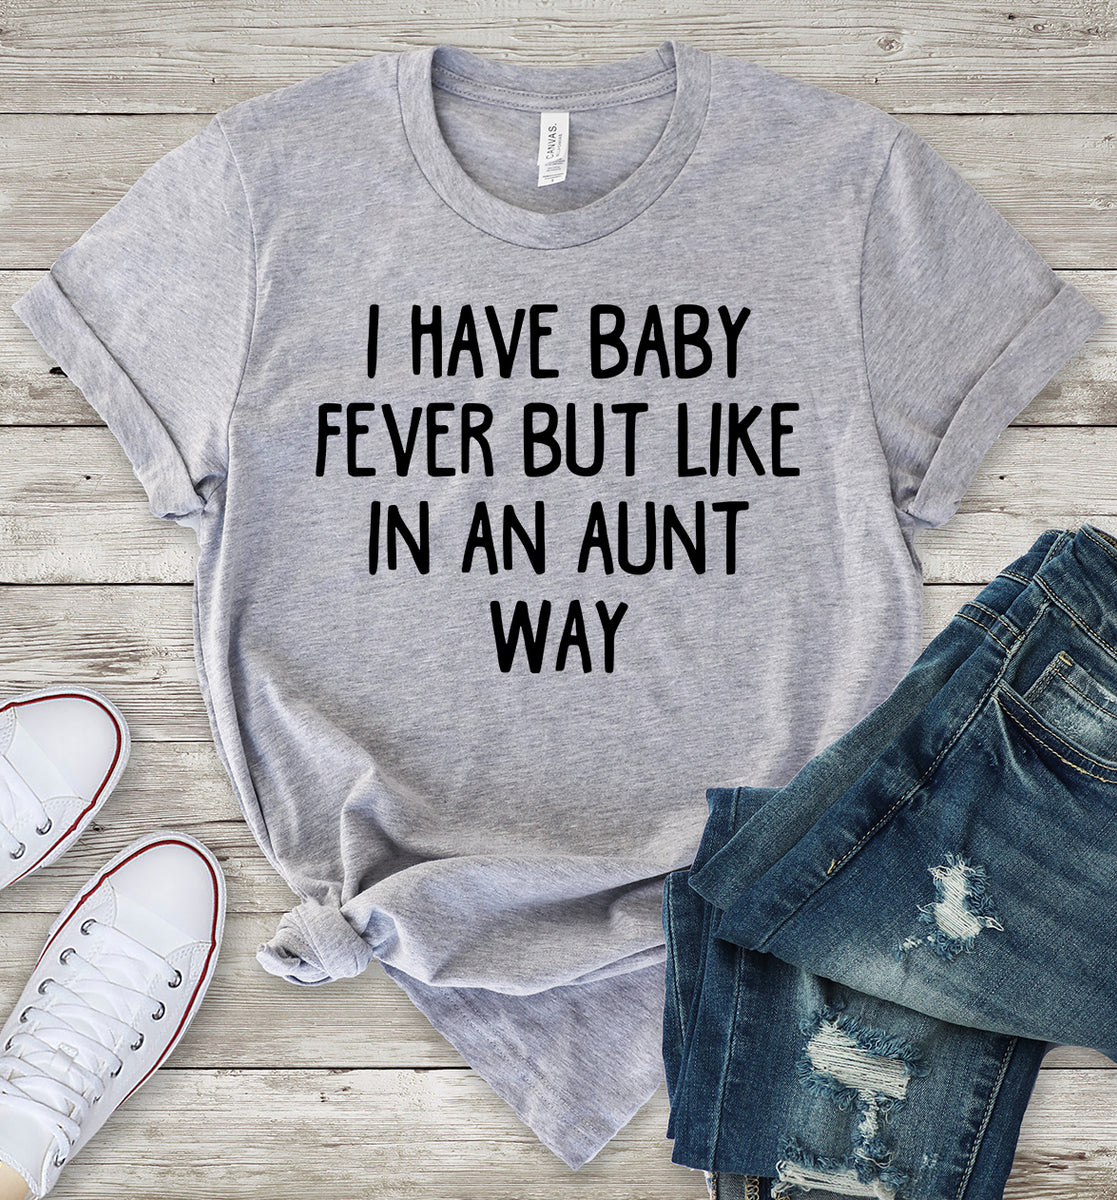 I Have Baby Fever But Like in an Aunt Way T-Shirt